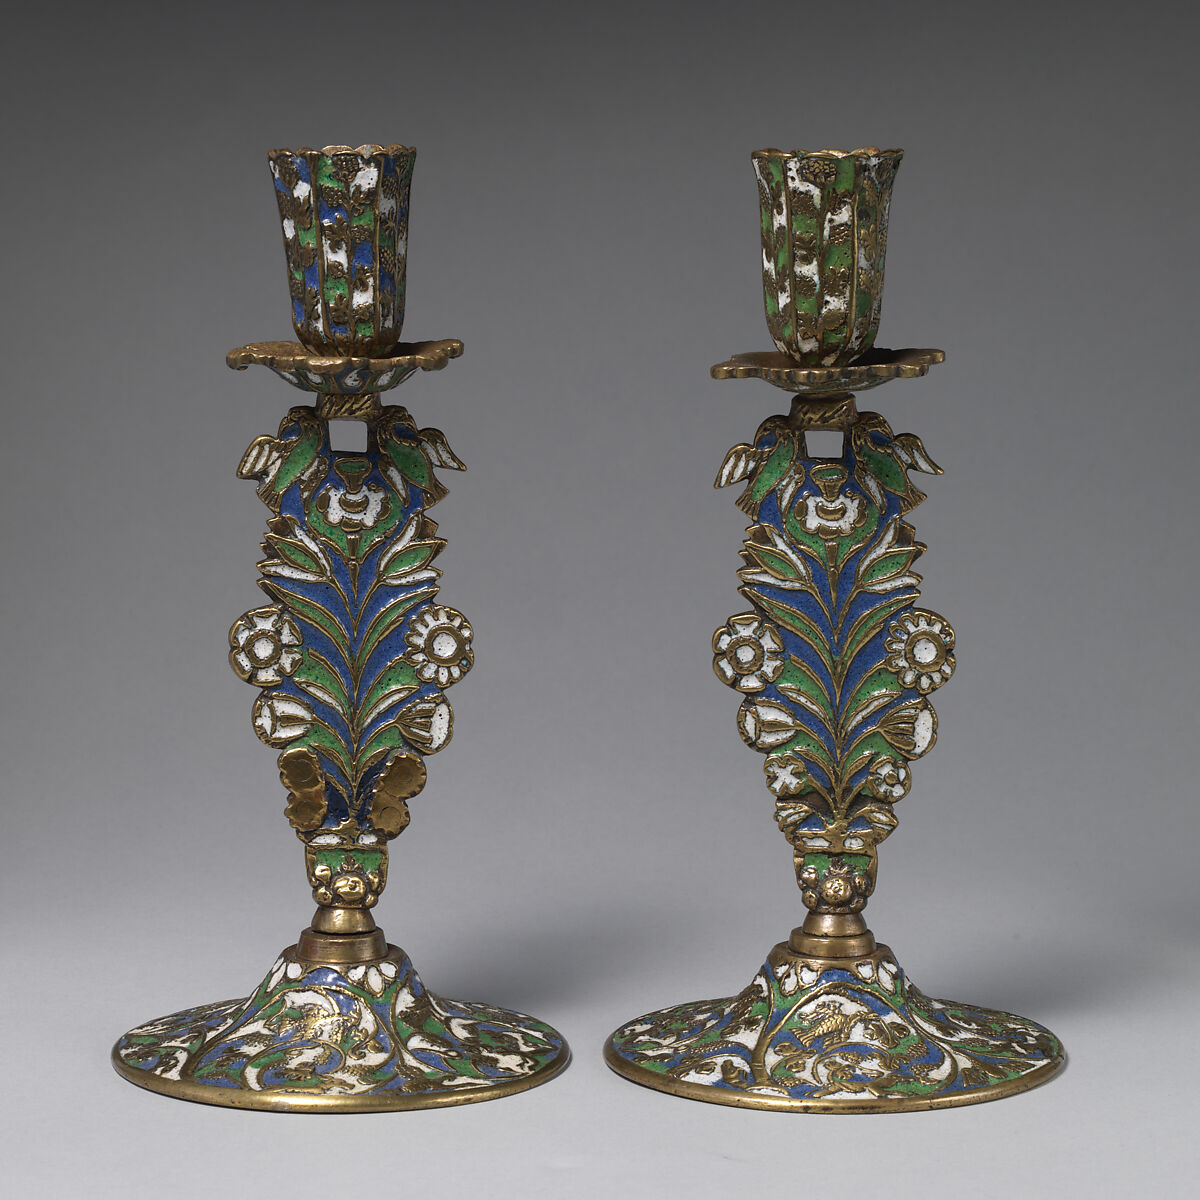 Candlestick (one of a pair), Stephen Pilcherd (British, free of the London Founders&#39; Company 1625, died 1670) or, Brass, partly enameled, British, London 